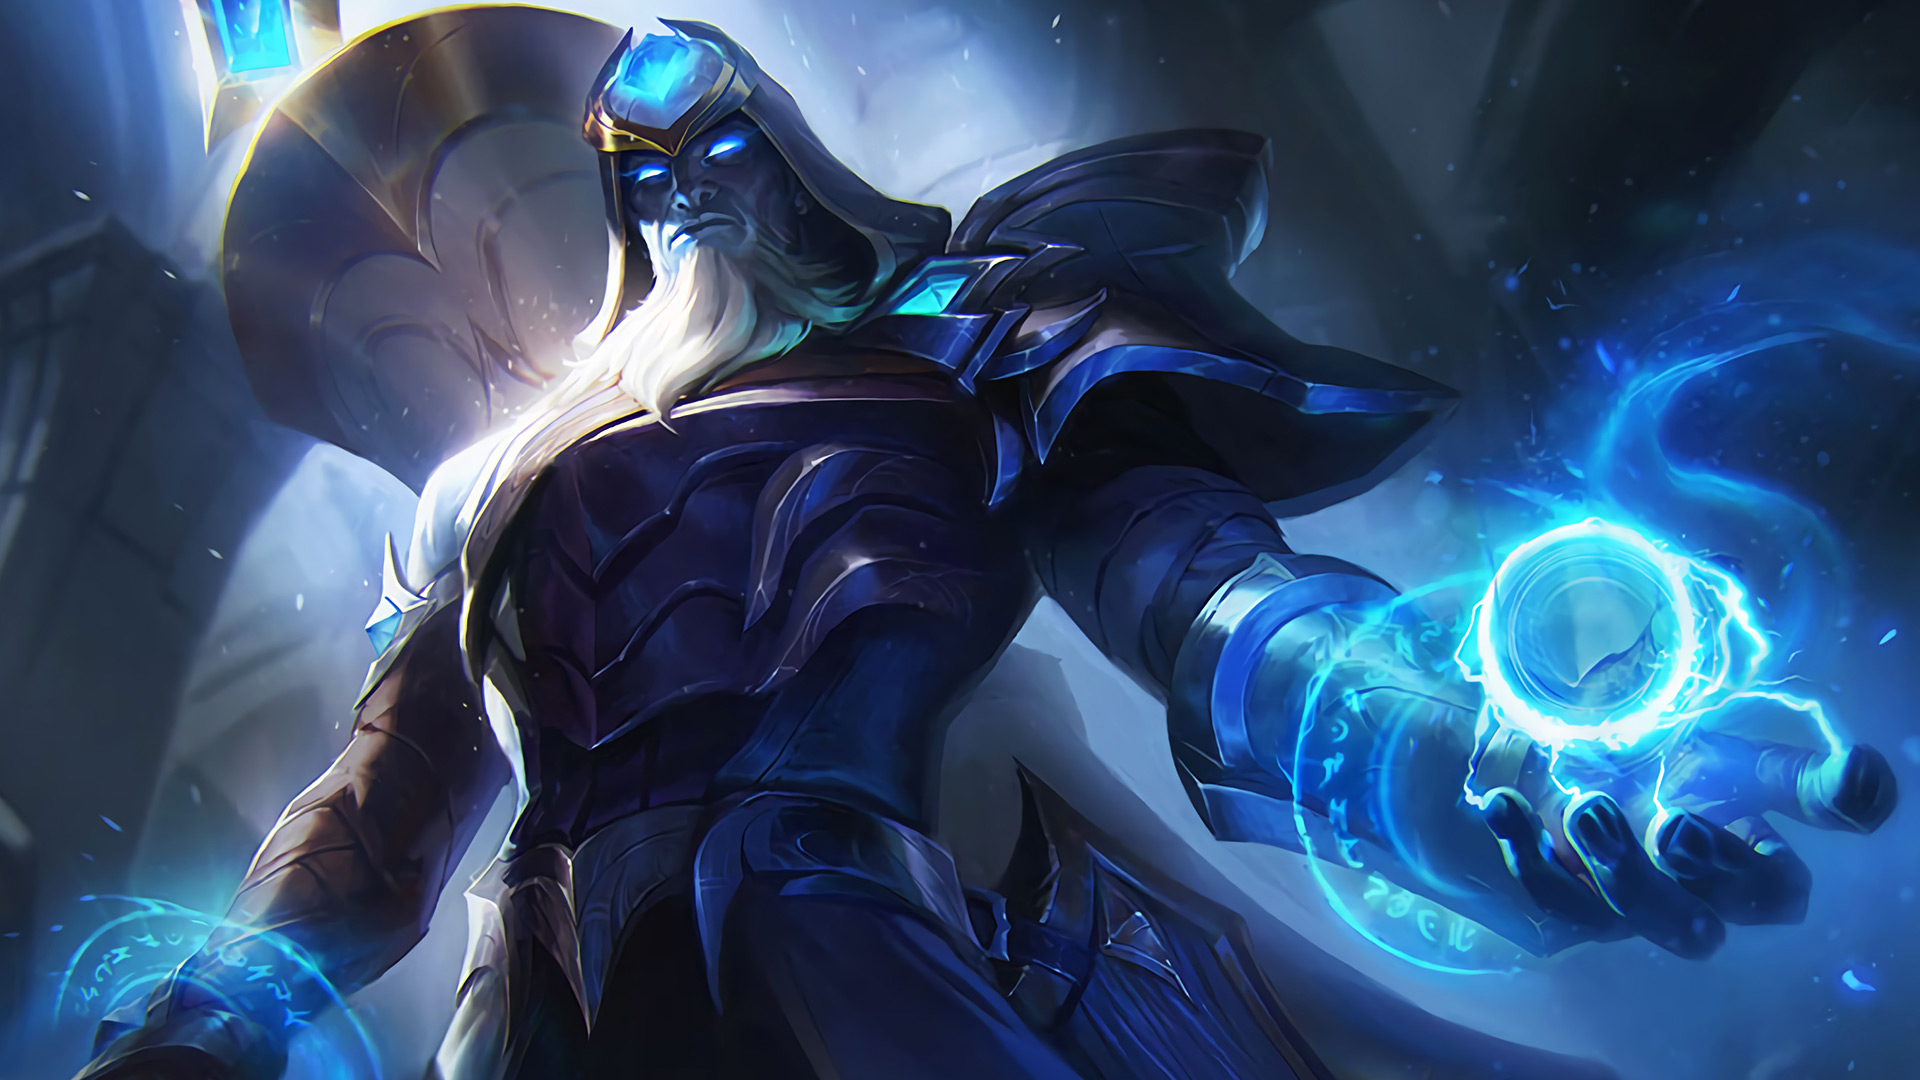 League of Legends' uninspired 2023 cinematic prompts Riot response